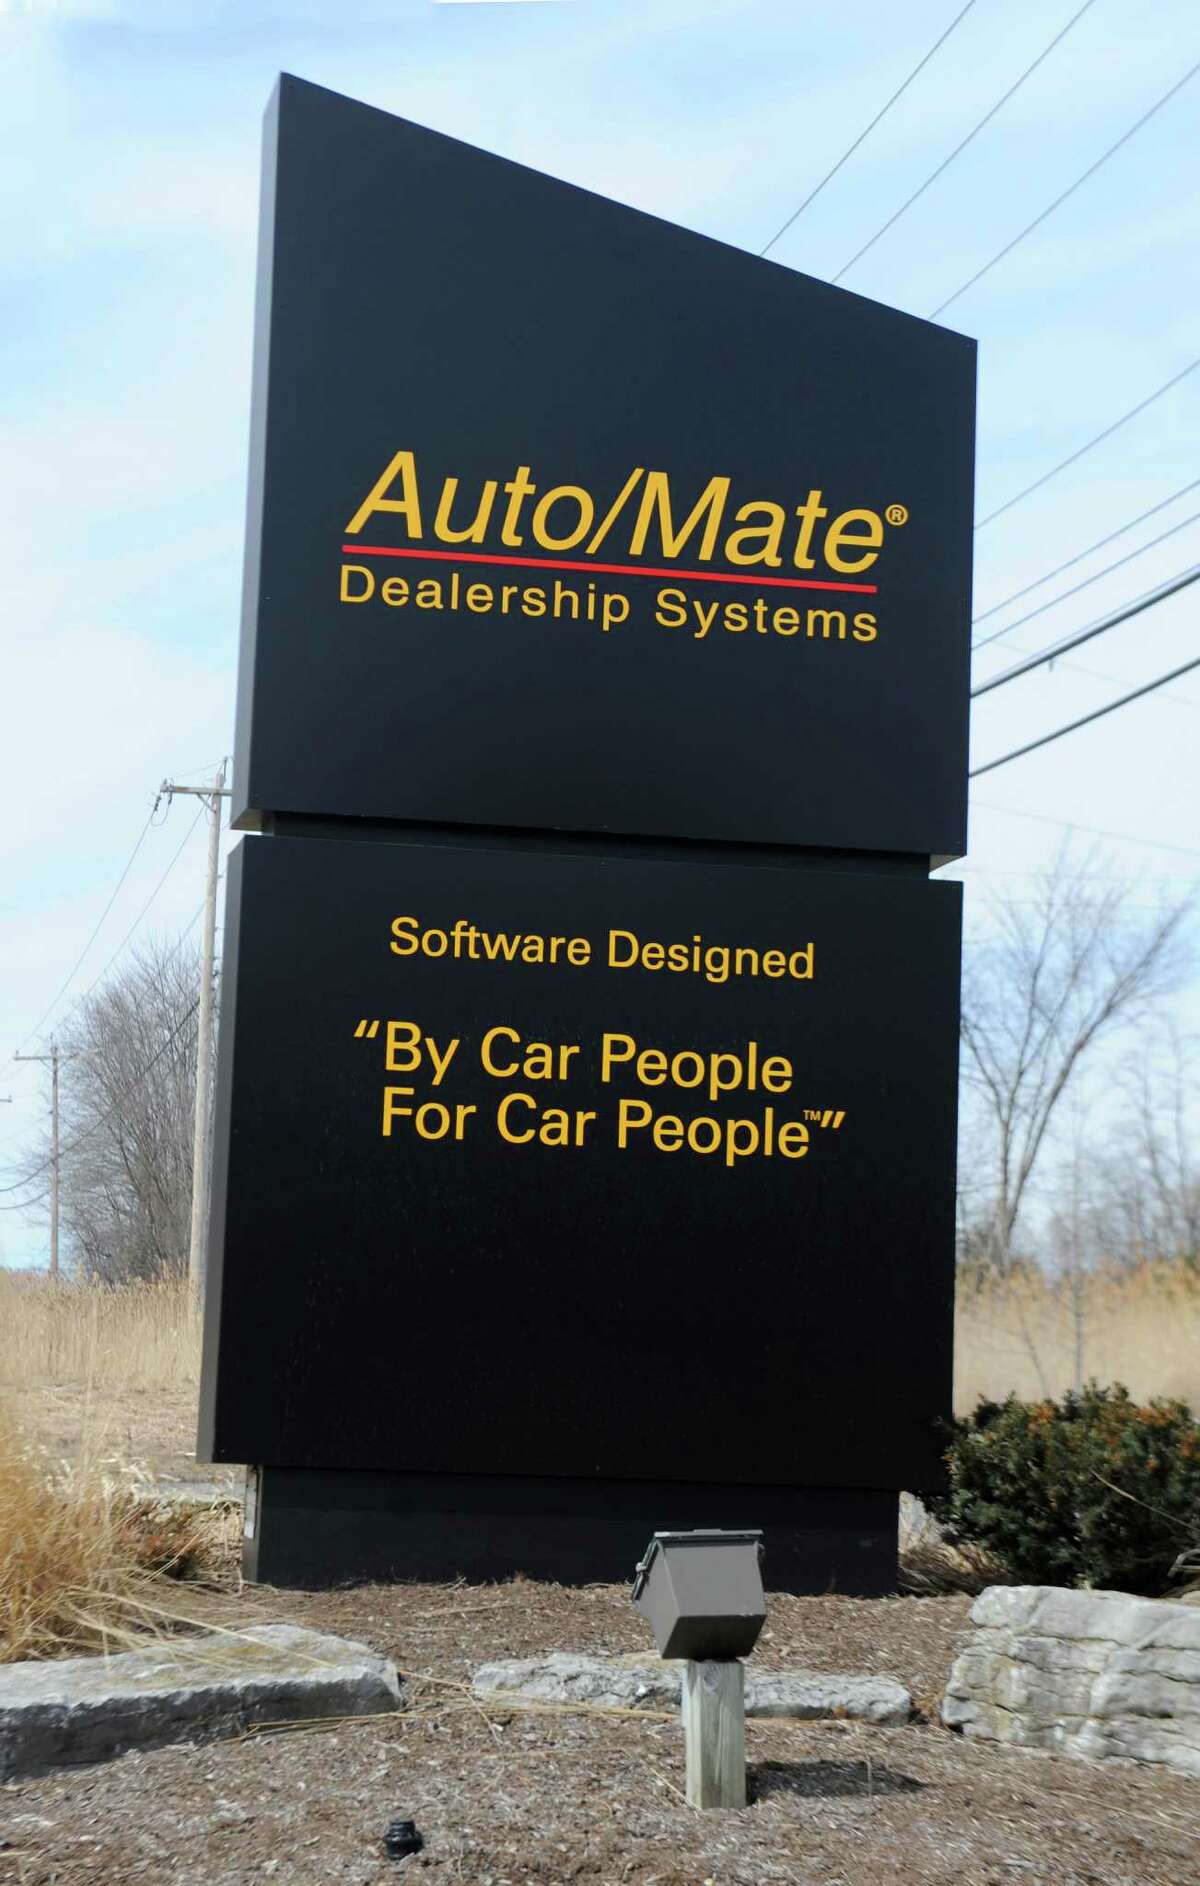 Sign in front of top work place Auto/Mate on Tuesday, March 24, 2015 in Colonie, N.Y. (Lori Van Buren / Times Union)